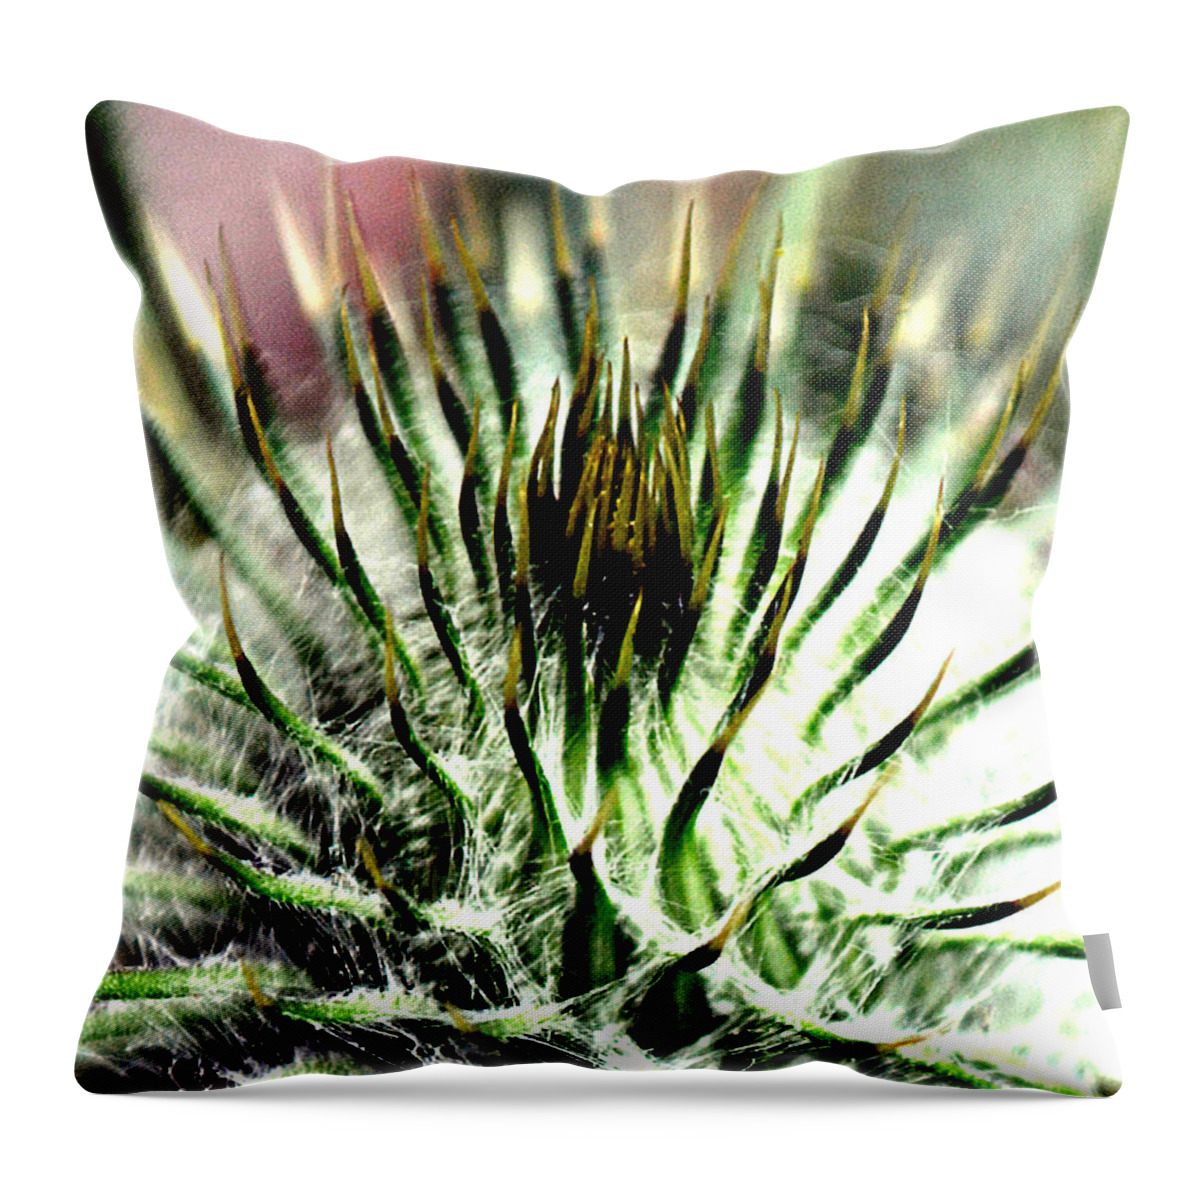 Beautiful Throw Pillow featuring the photograph Macro Thistle by Jason Roust